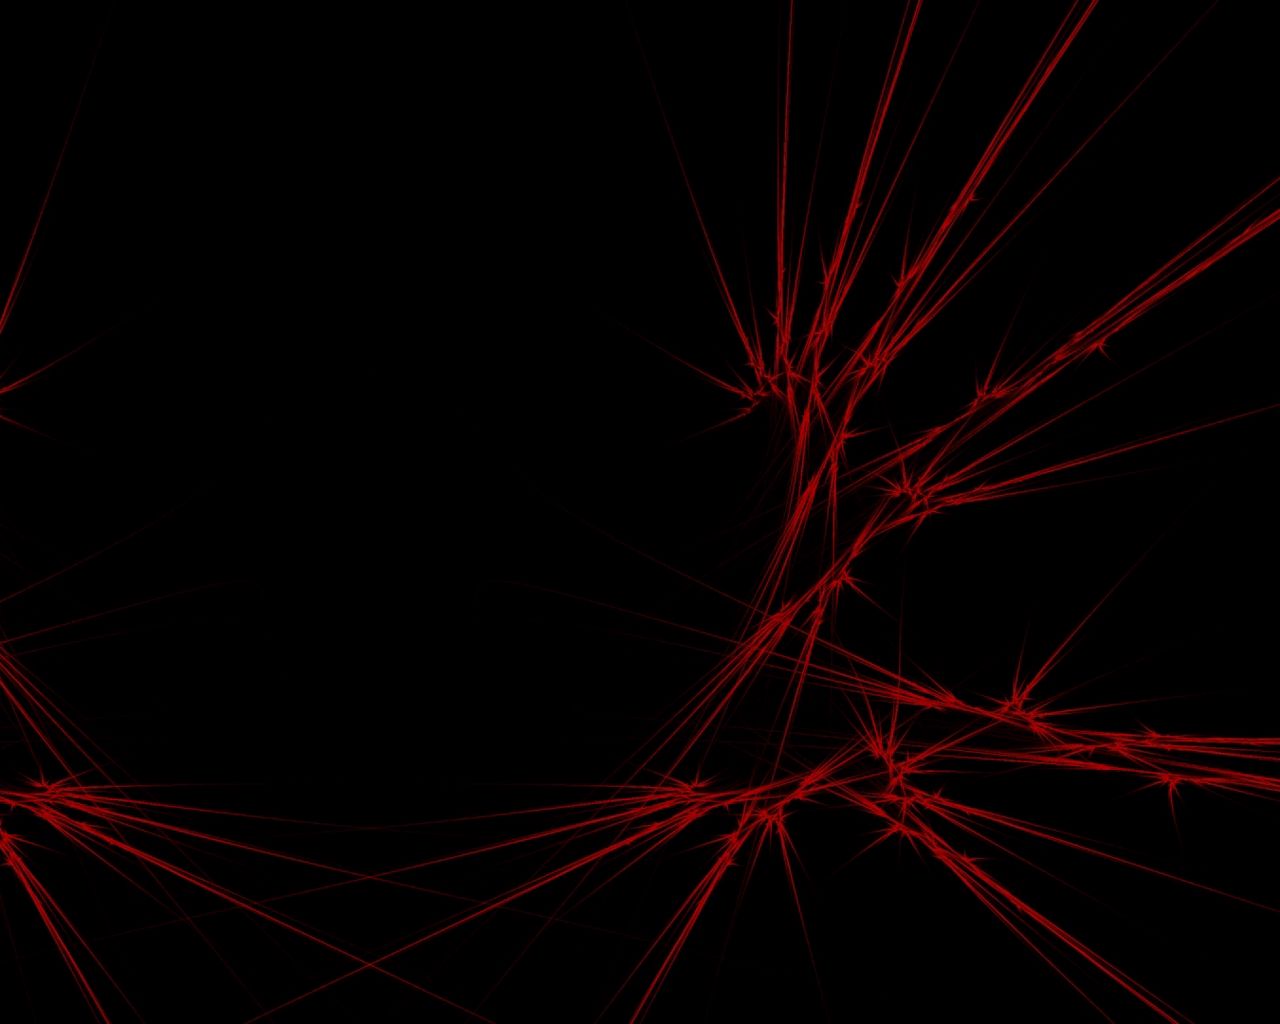 Download wallpaper 1280x1024 red, black, abstract standard 5:4 hd background